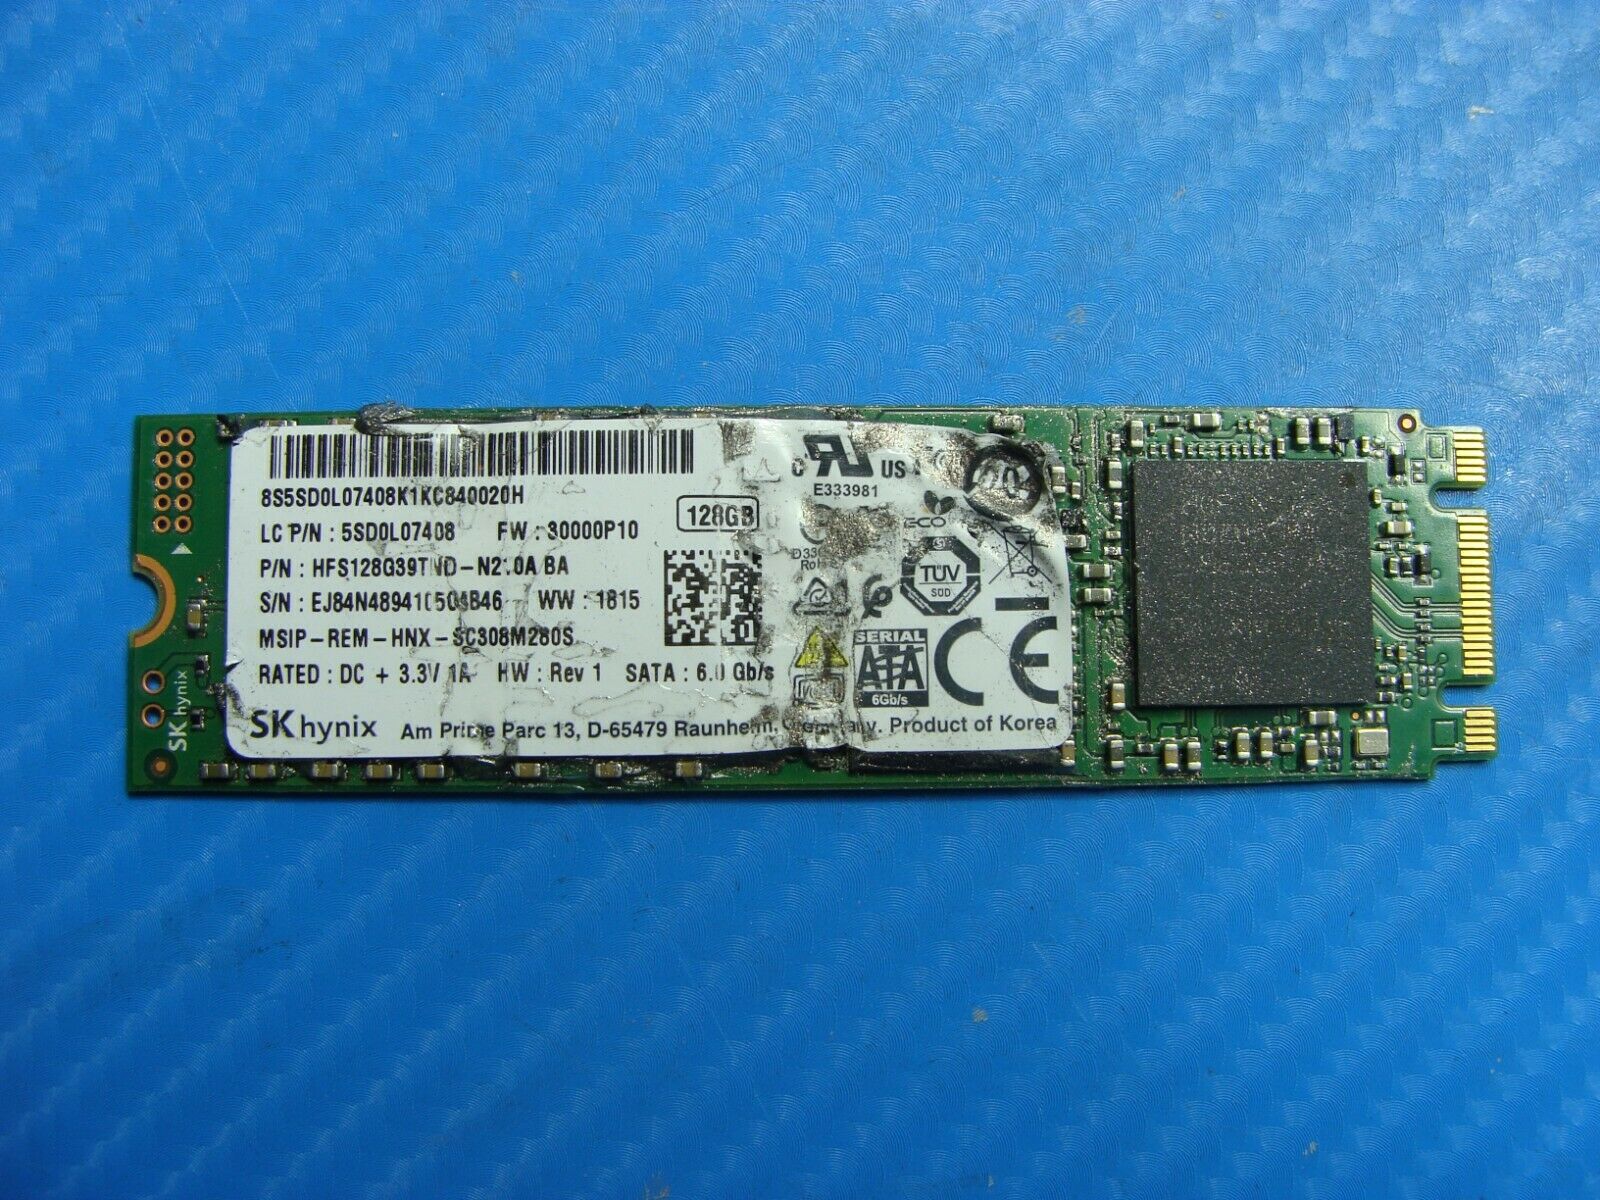 Lenovo Yoga 720-12IKB SKhynix 128GB SATA M.2 SSD Solid State Drive 5SD0L07408 - Laptop Parts - Buy Authentic Computer Parts - Top Seller Ebay